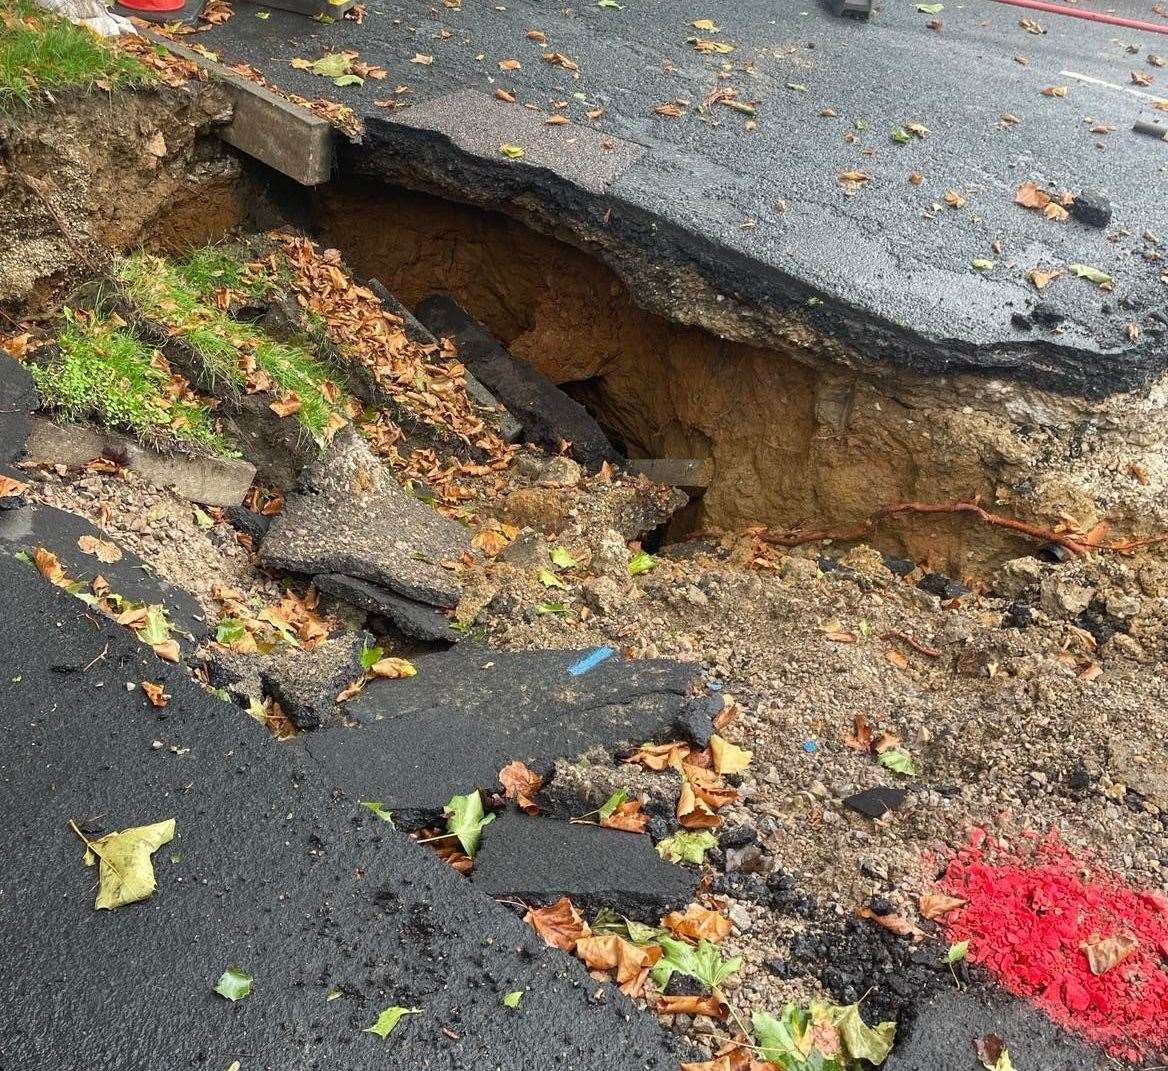 The sinkhole has expanded and the road is now closed. Picture: John Kane